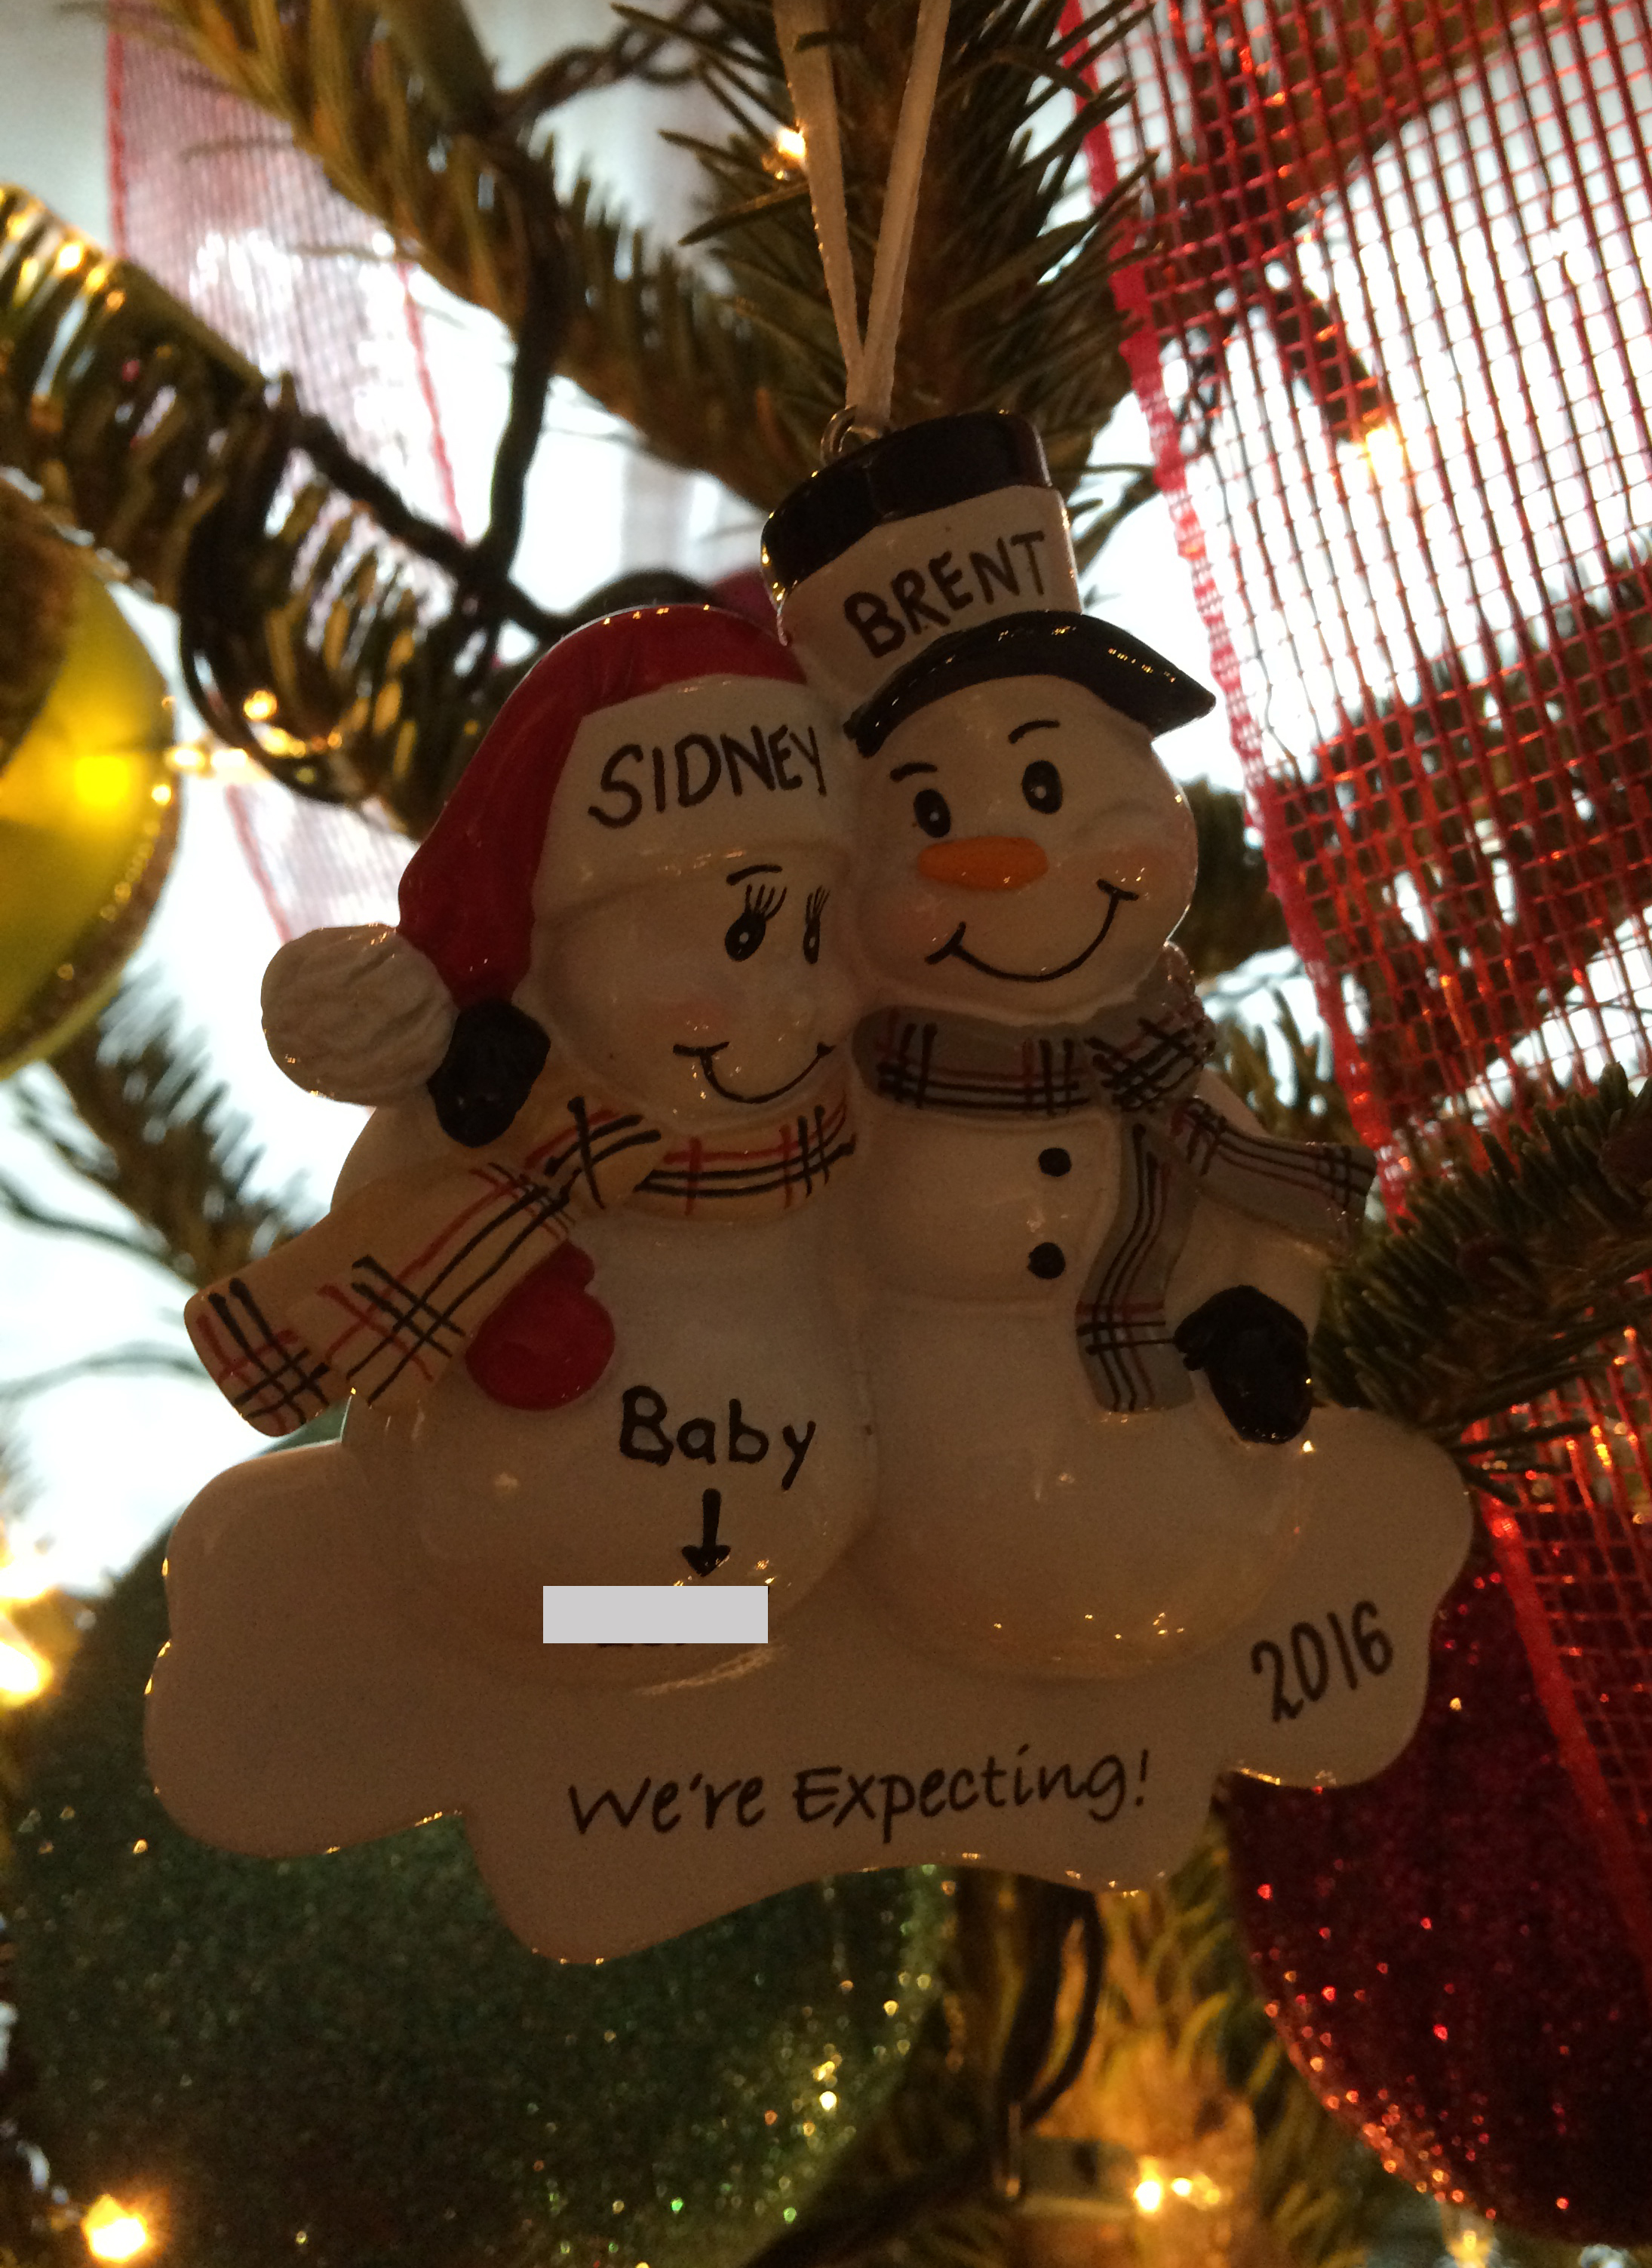 Needless to say, this is a very precious ornament and it will be a treasured part of our tree for years and years to come.